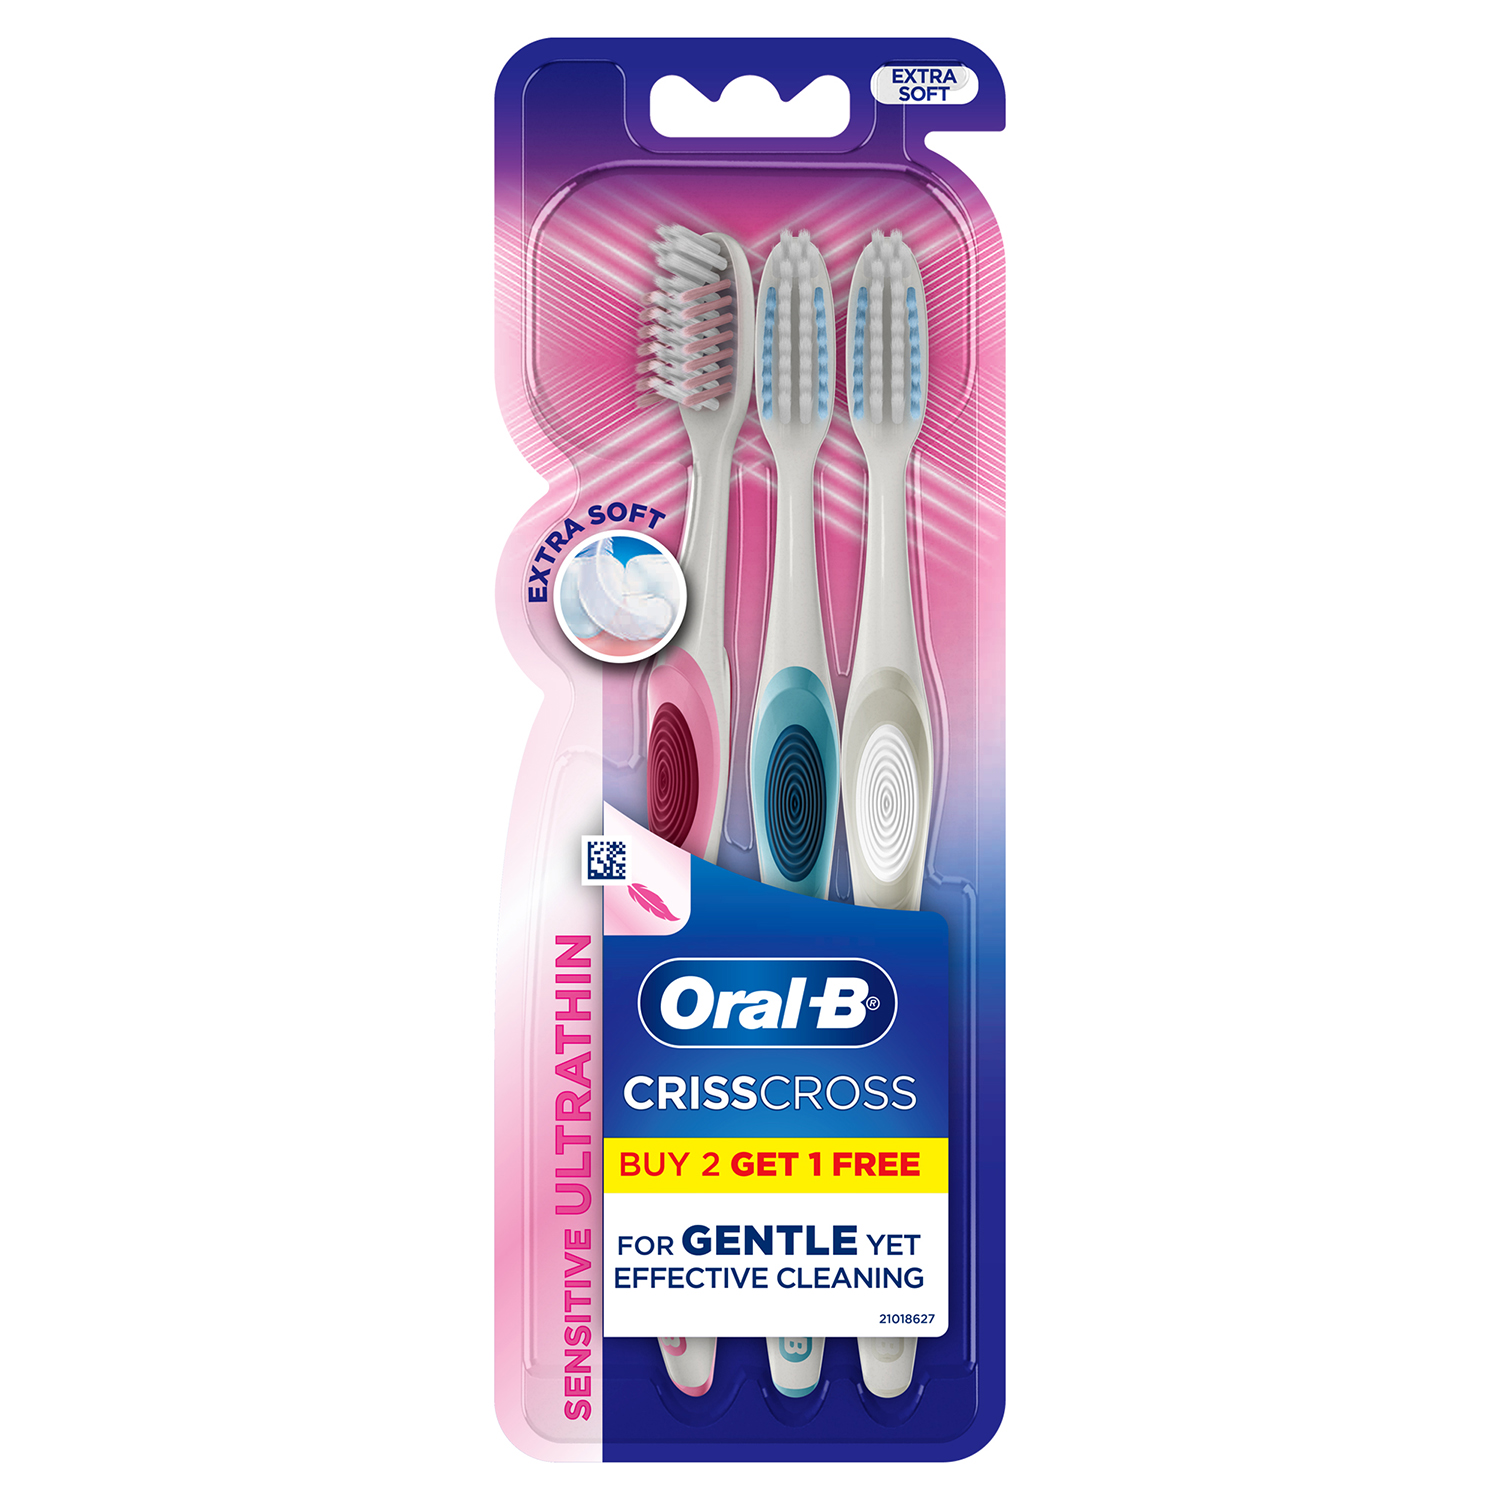 Oral-B Crisscross Sensitive Ultrathin Manual Adults Toothbrush – 3 Pieces (Extra Soft Buy 2 Get 1)